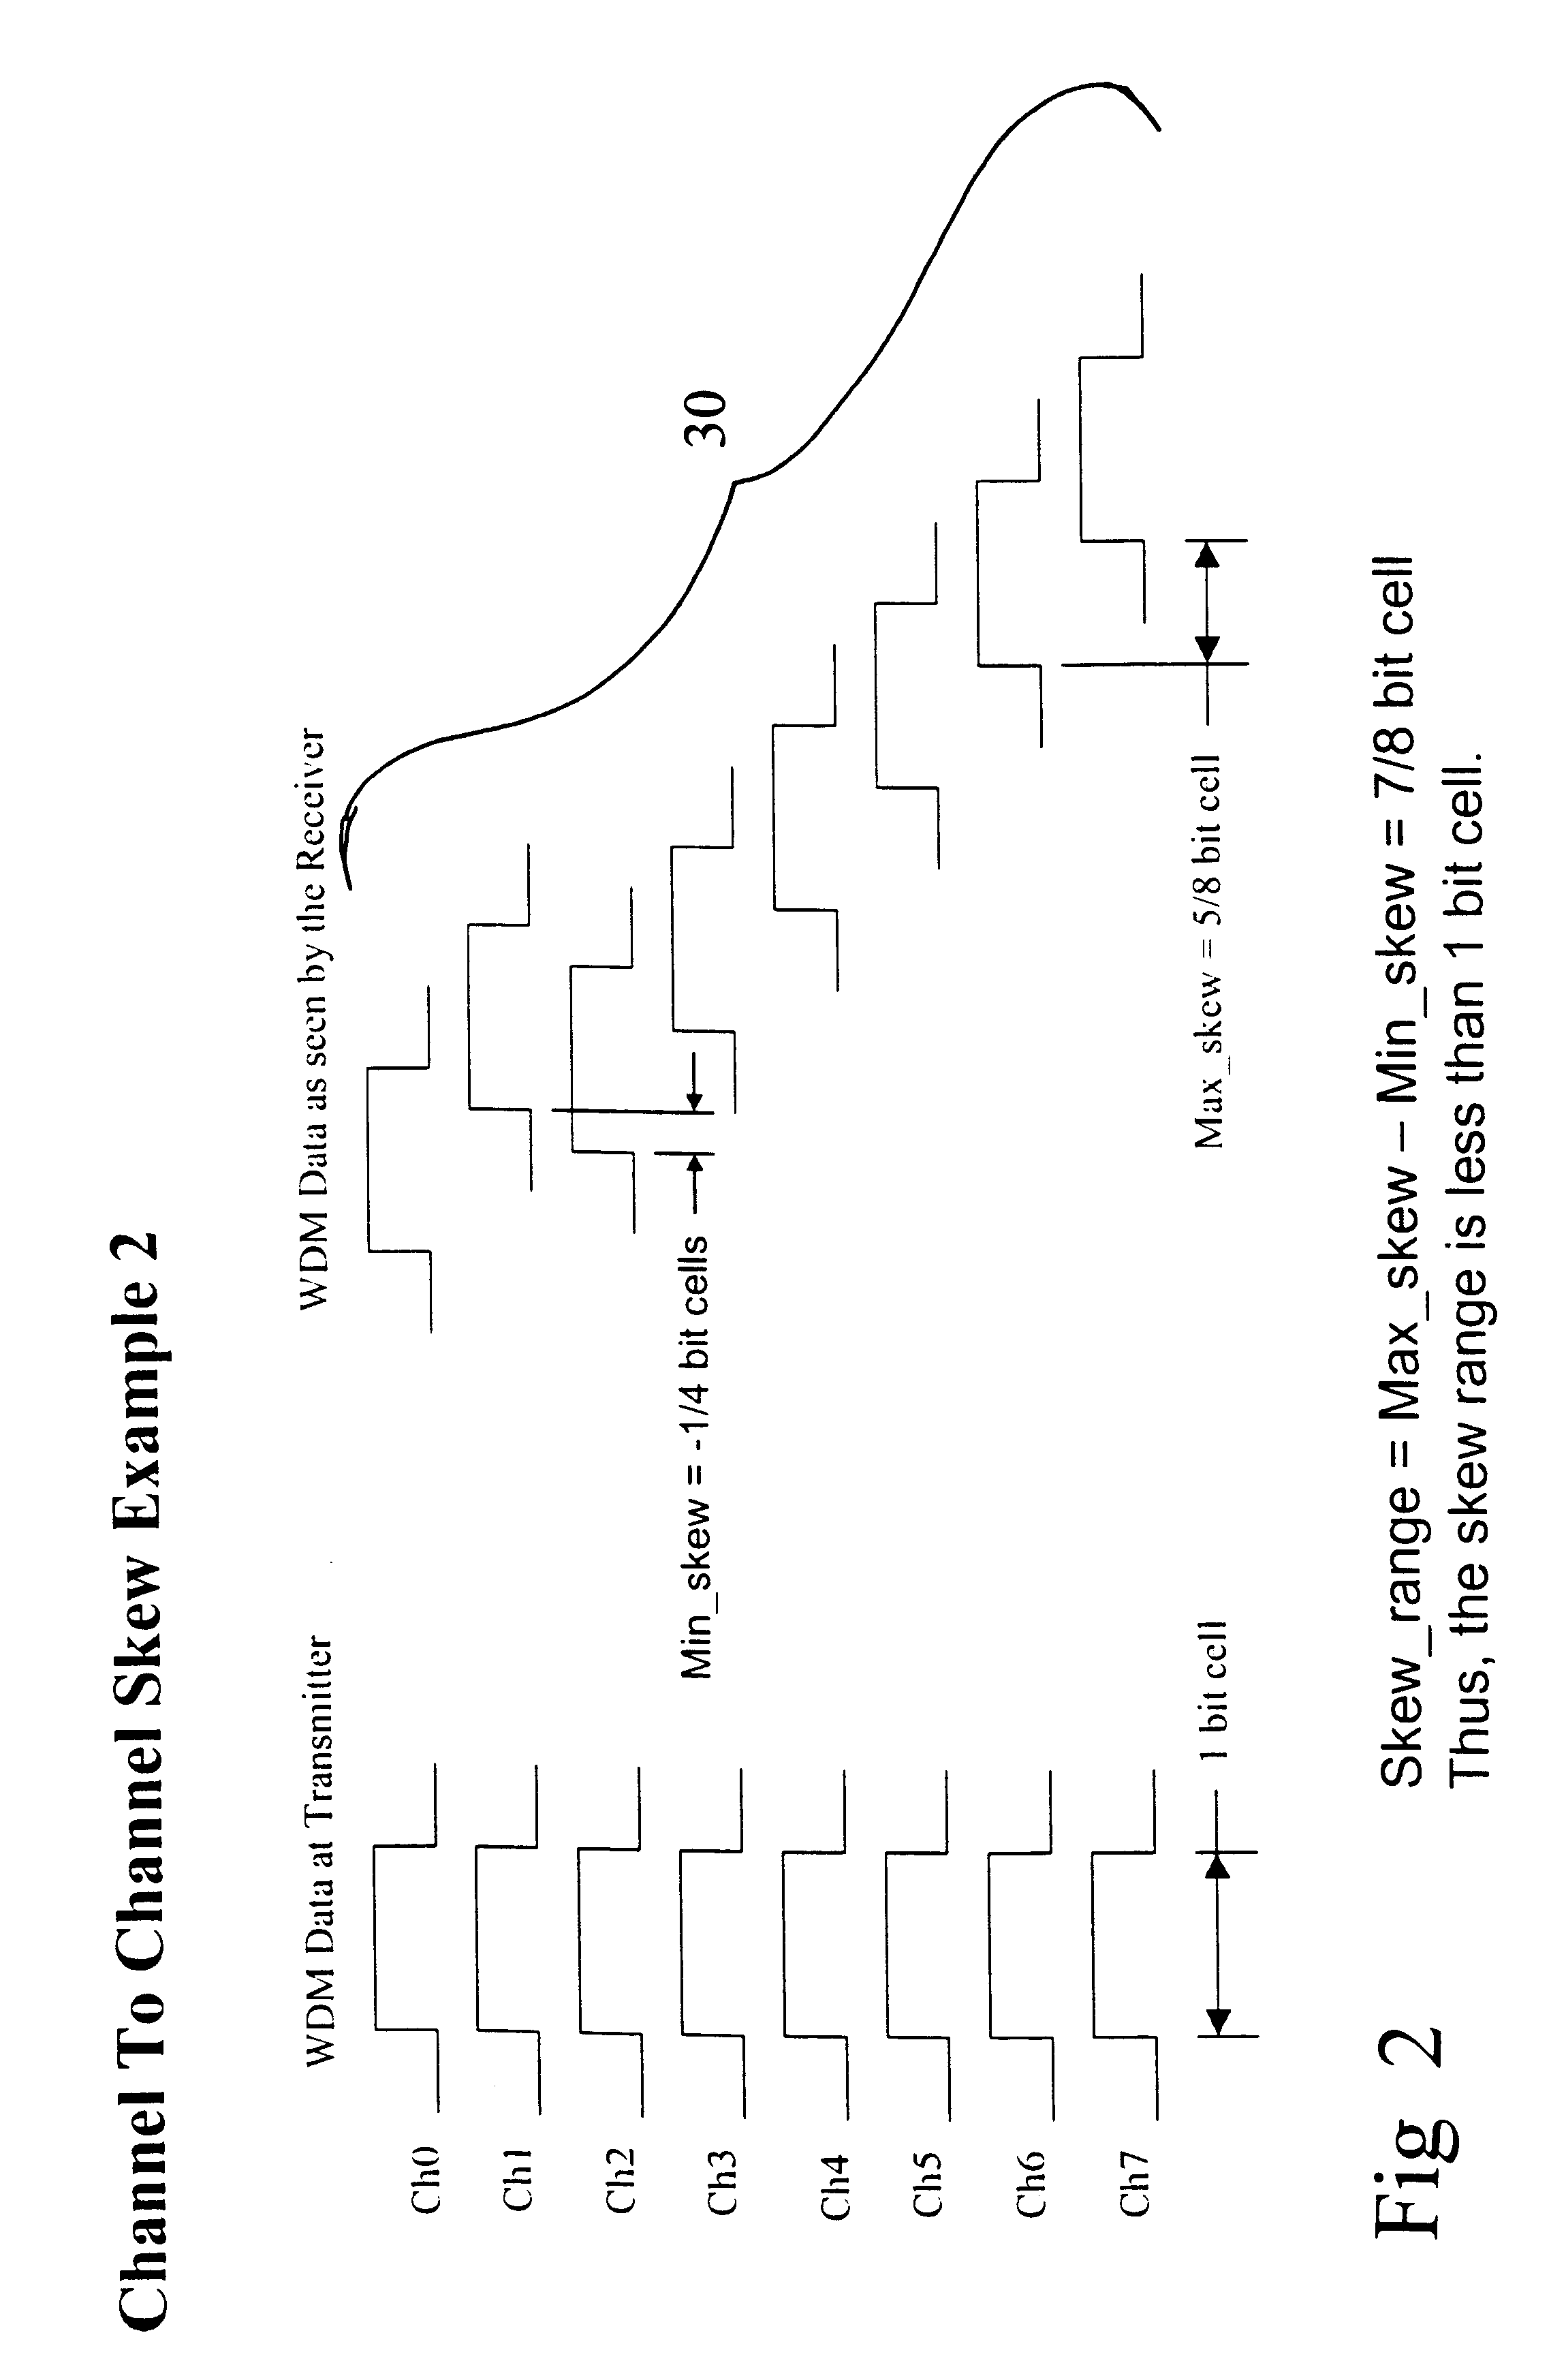 Skew discovery and compensation for WDM fiber communications systems using 8b10b encoding